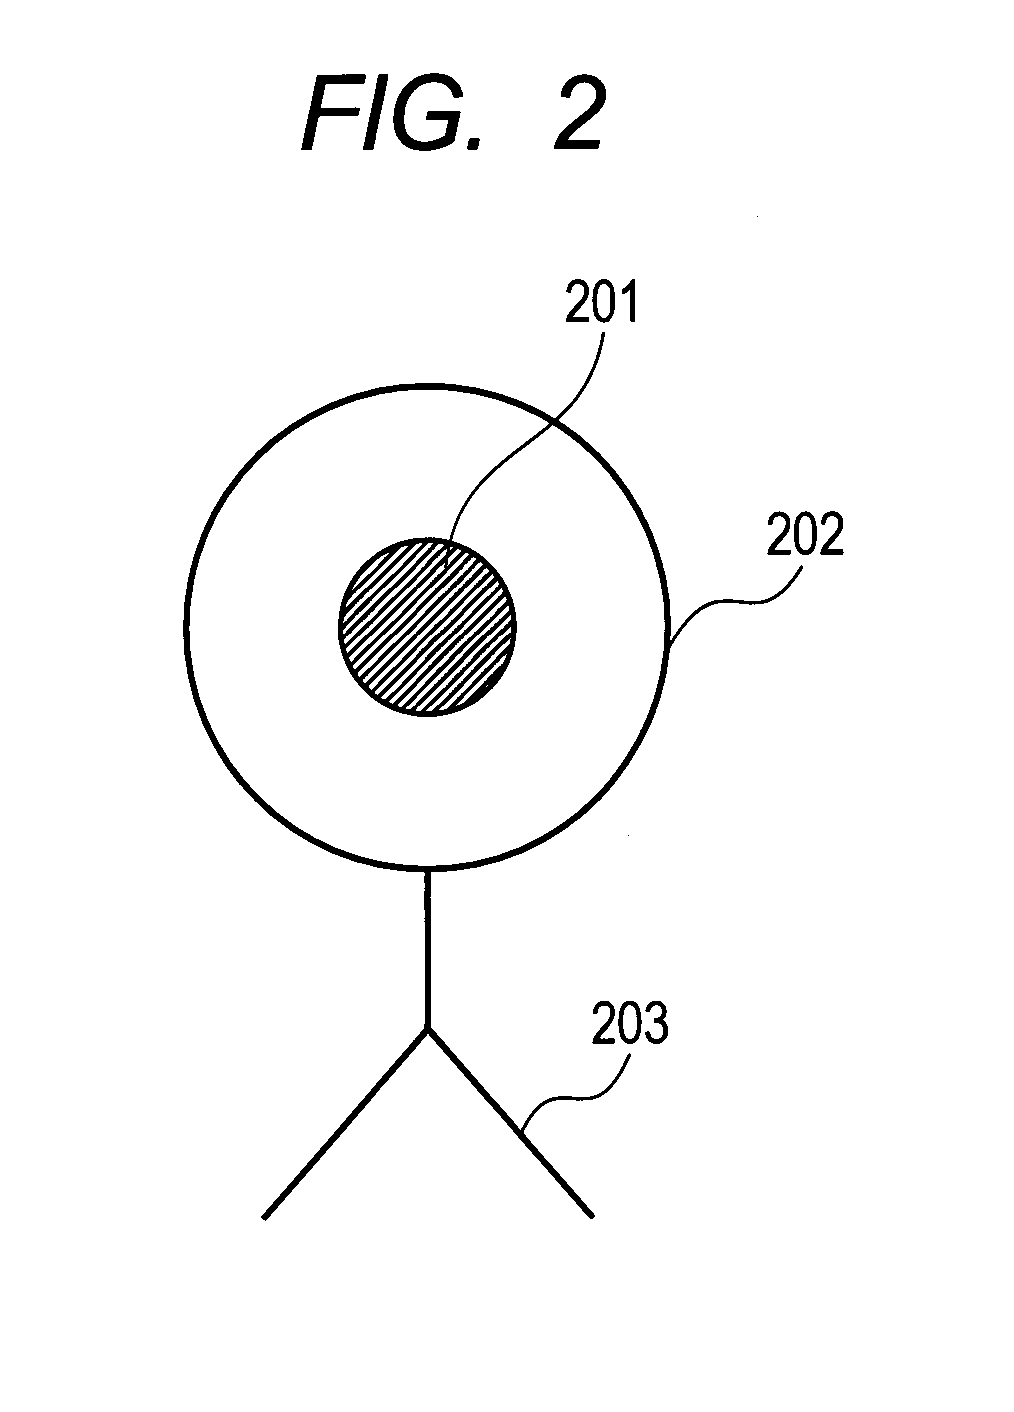 Magnetic-Field Measurement Device